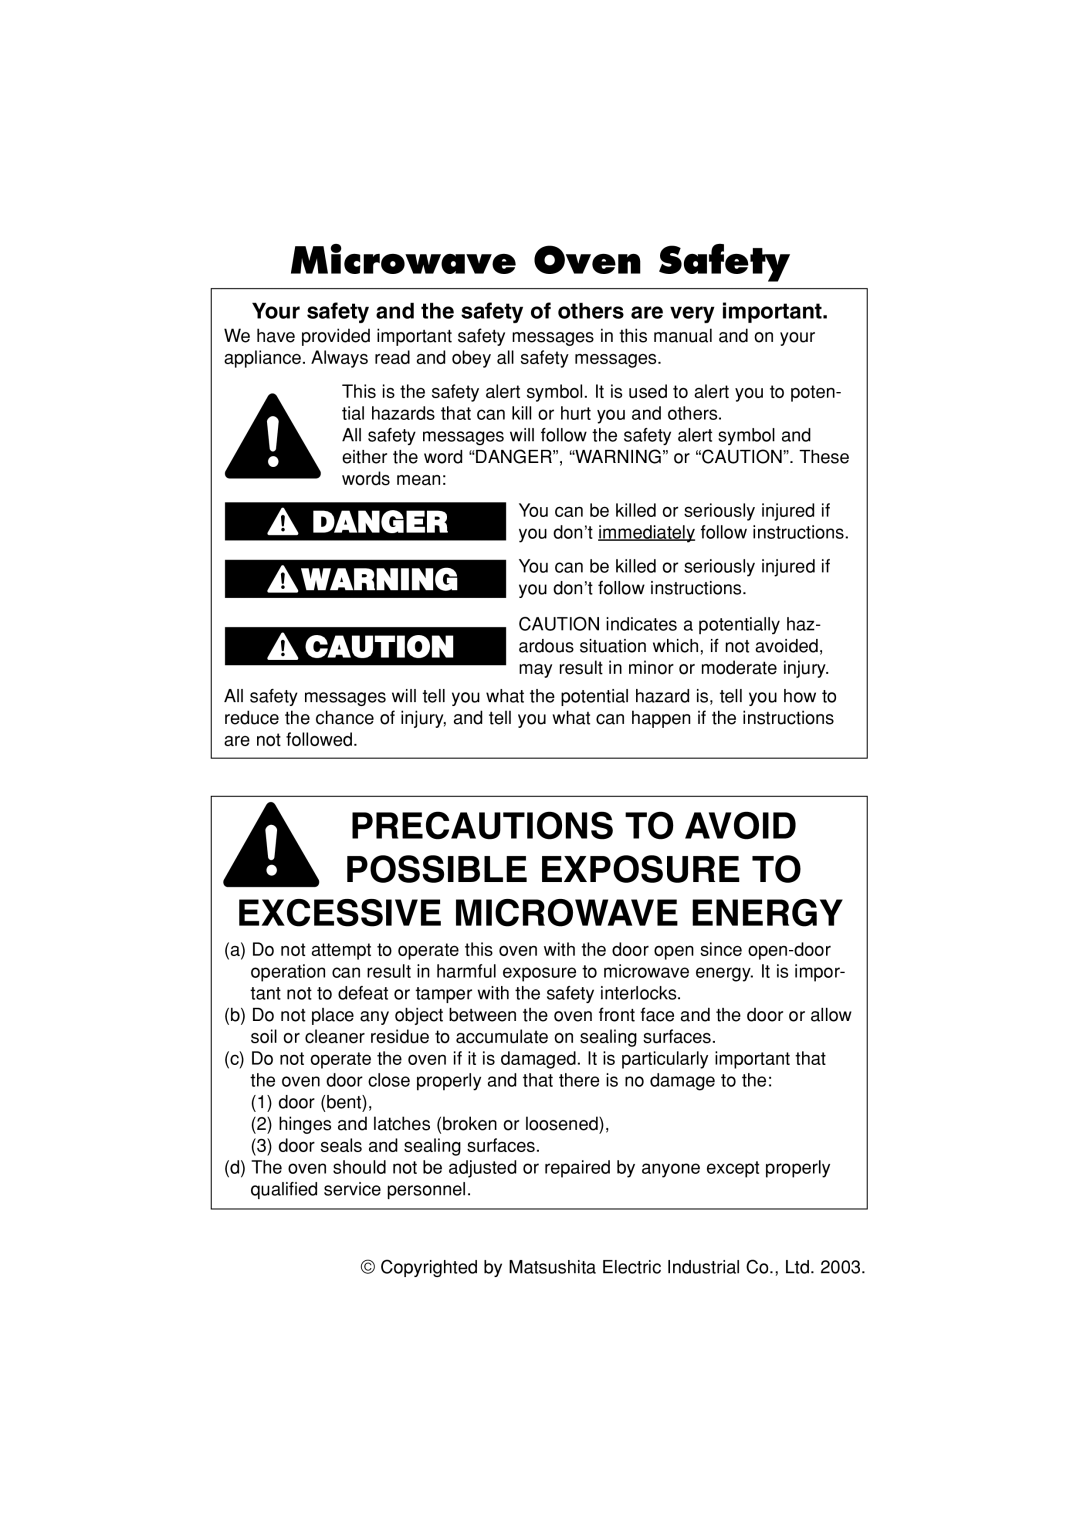 Panasonic NN-T793 Excessive Microwave Energy, Precautions To Avoid Possible Exposure To, Microwave Oven Safety, Danger 